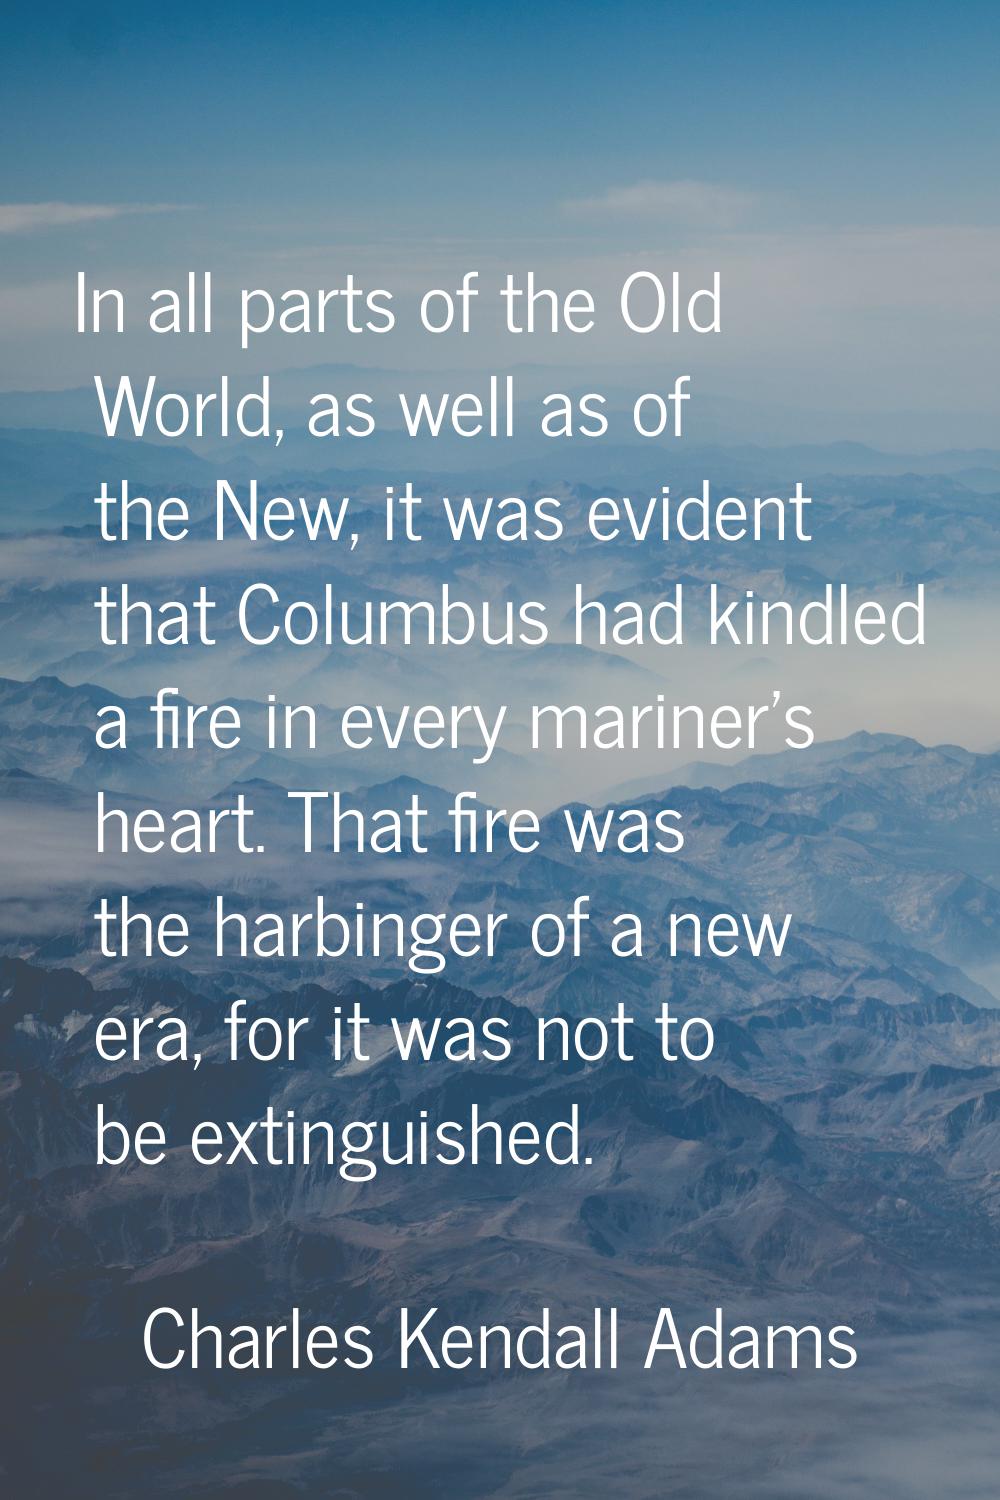 In all parts of the Old World, as well as of the New, it was evident that Columbus had kindled a fi